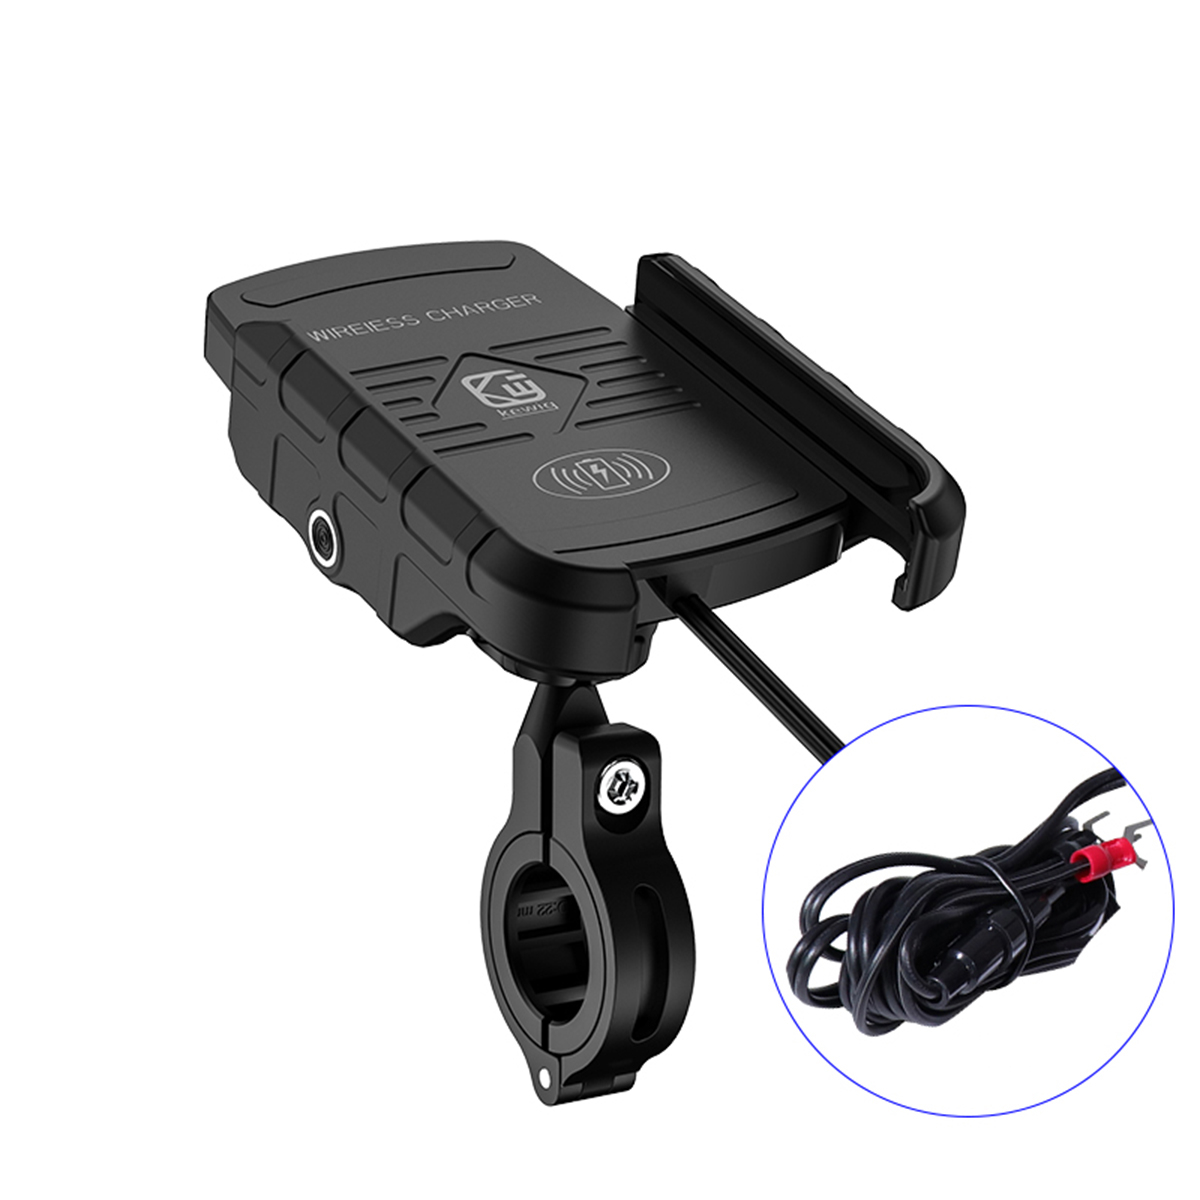 

15W Qi Wireless Charger Waterproof 360° Aluminum Phone Holder Handlebar Mount For Motorcycle Bike Bicycle